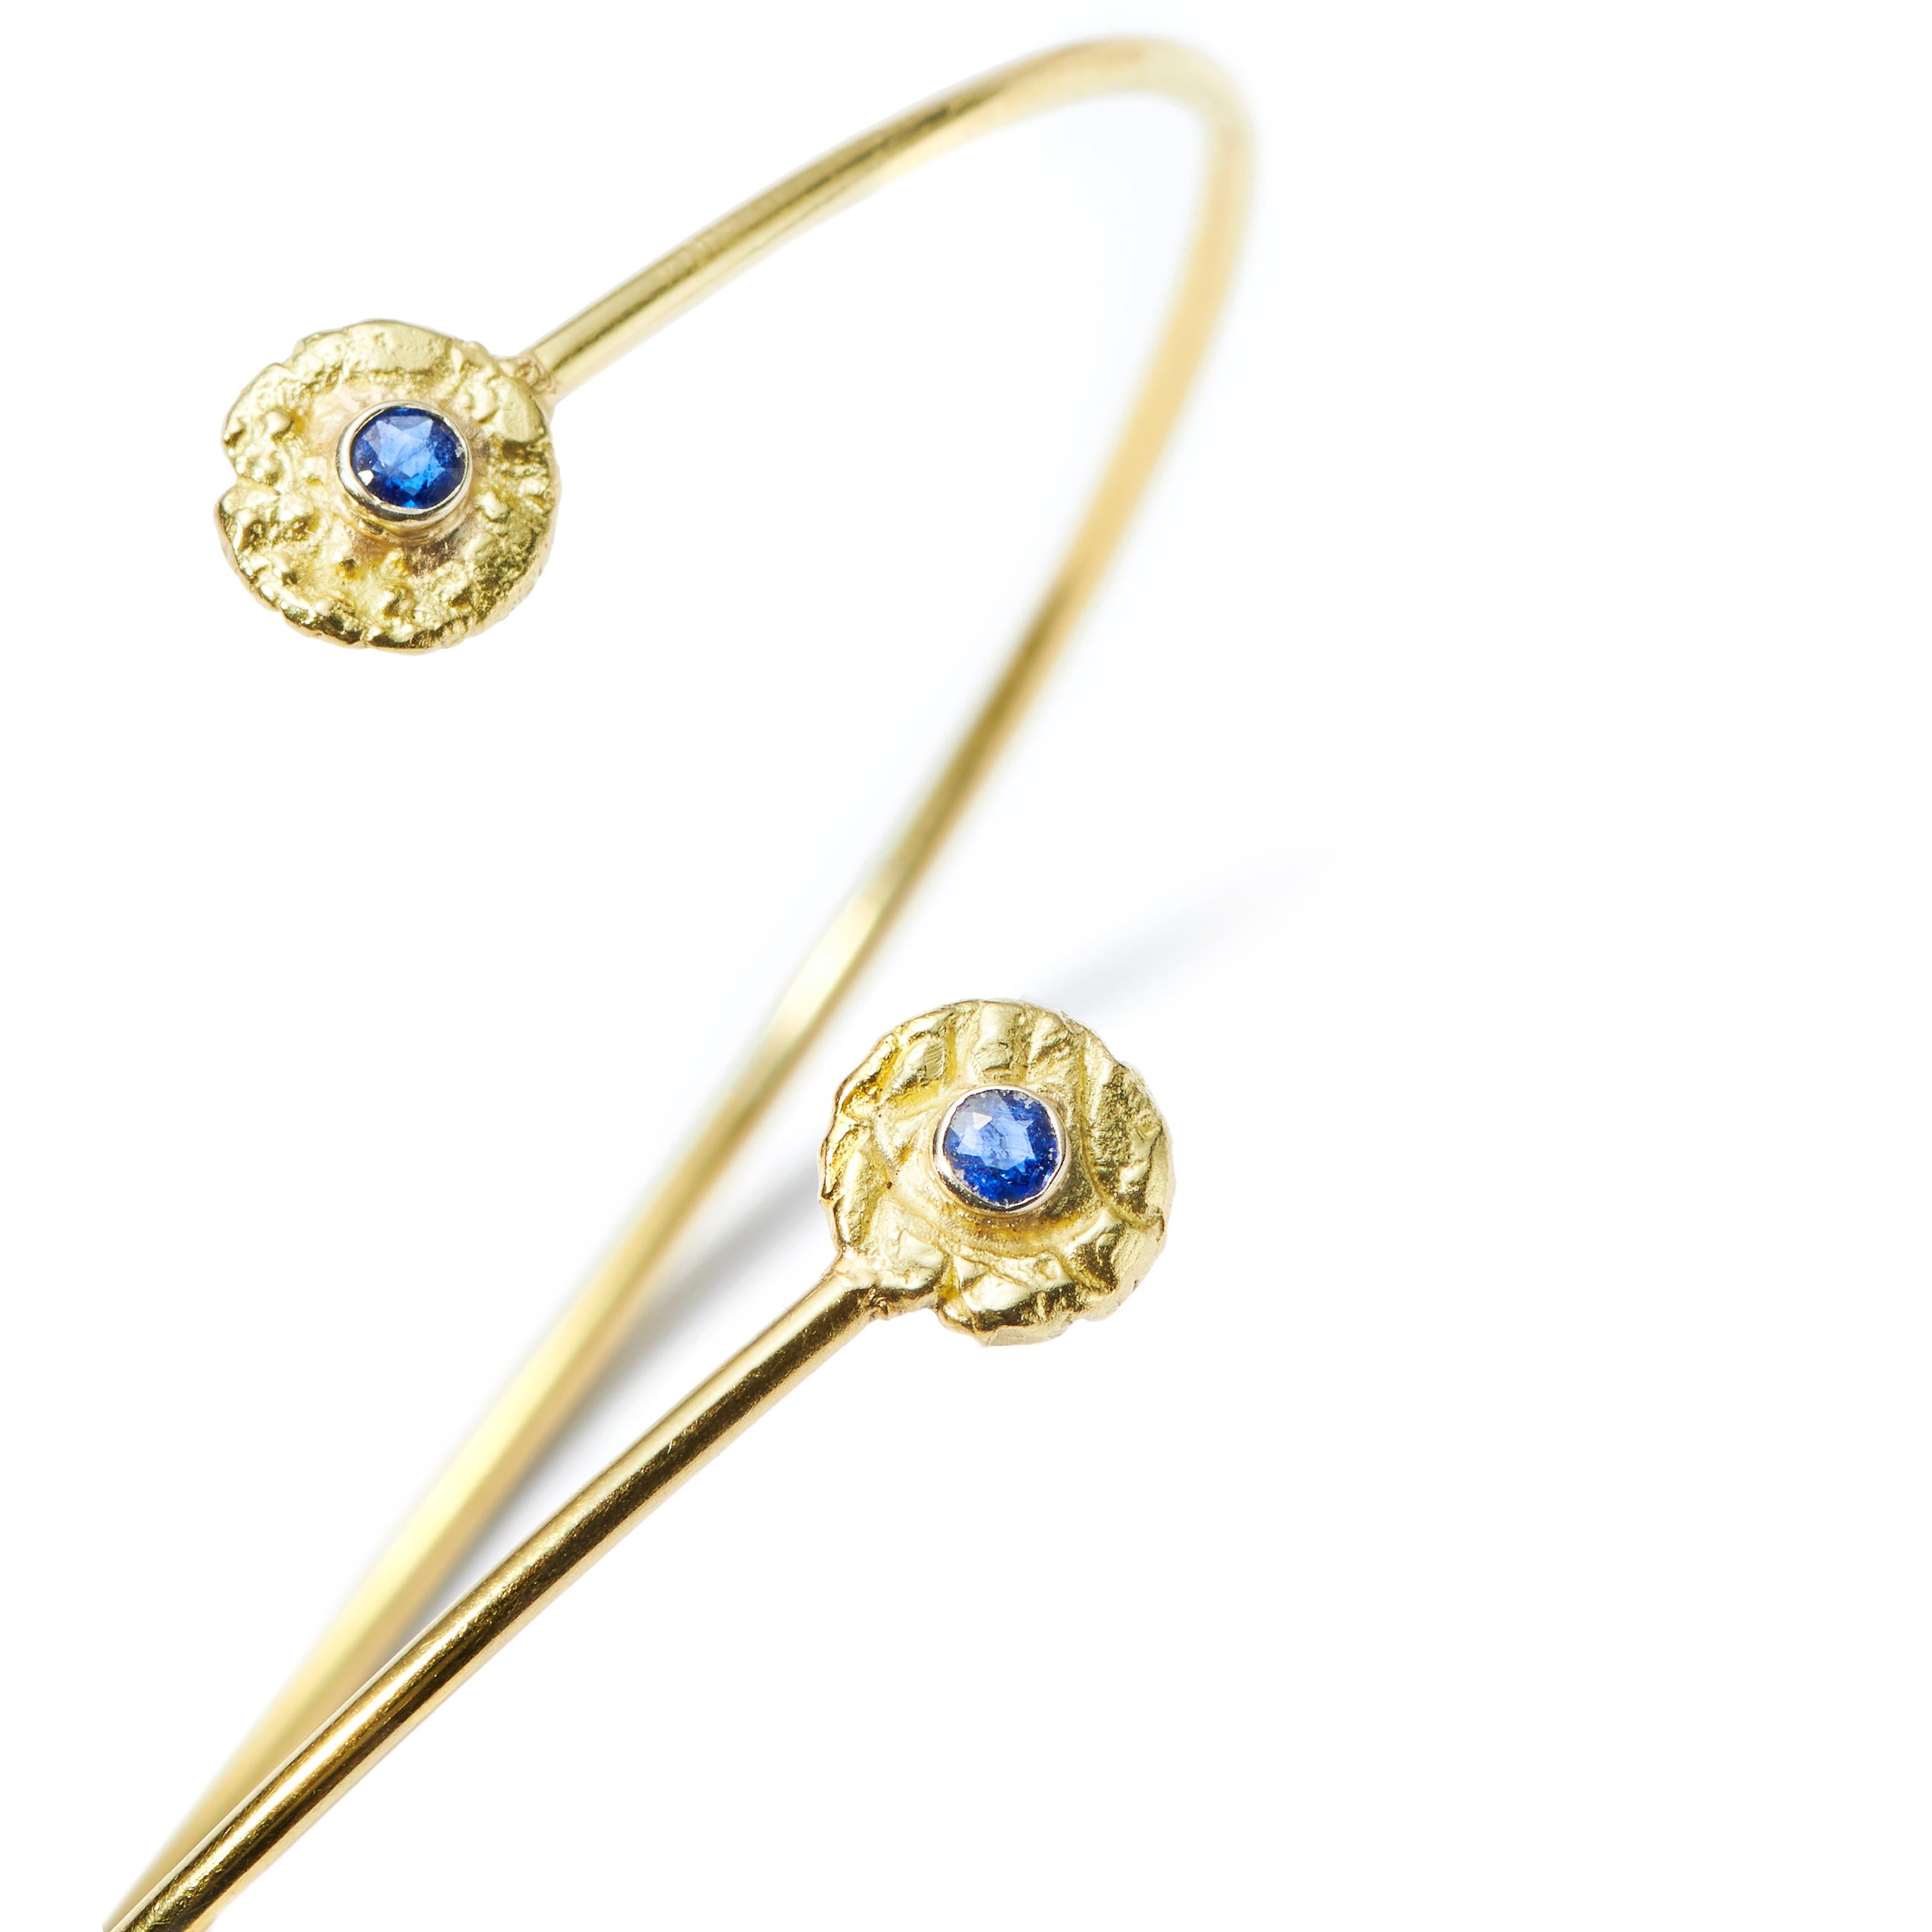 A chic new design in the Susan Lister Locke Collection. Simple and classic, this 18 Karat Gold bracelet features her exclusive “Seaquins” set with Blue Sapphires.

*Please note: The last photo features the Diamond  “Seaquin” Bypass Bangle Bracelet